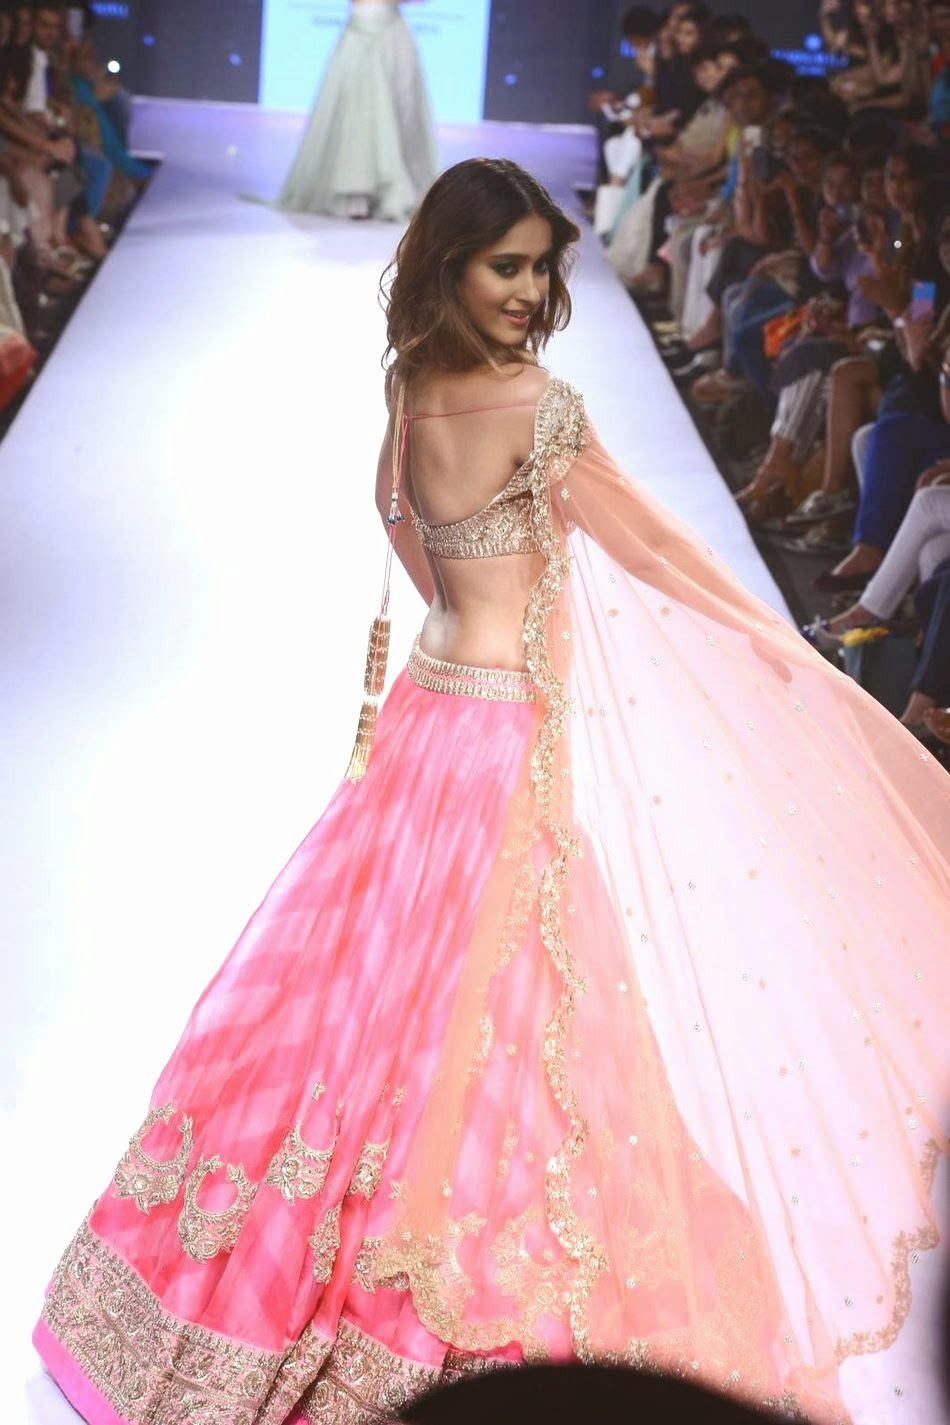 High Quality Bollywood Celebrity Pictures Ileana D Cruz Sexiest Navel Show On The Ramp As She